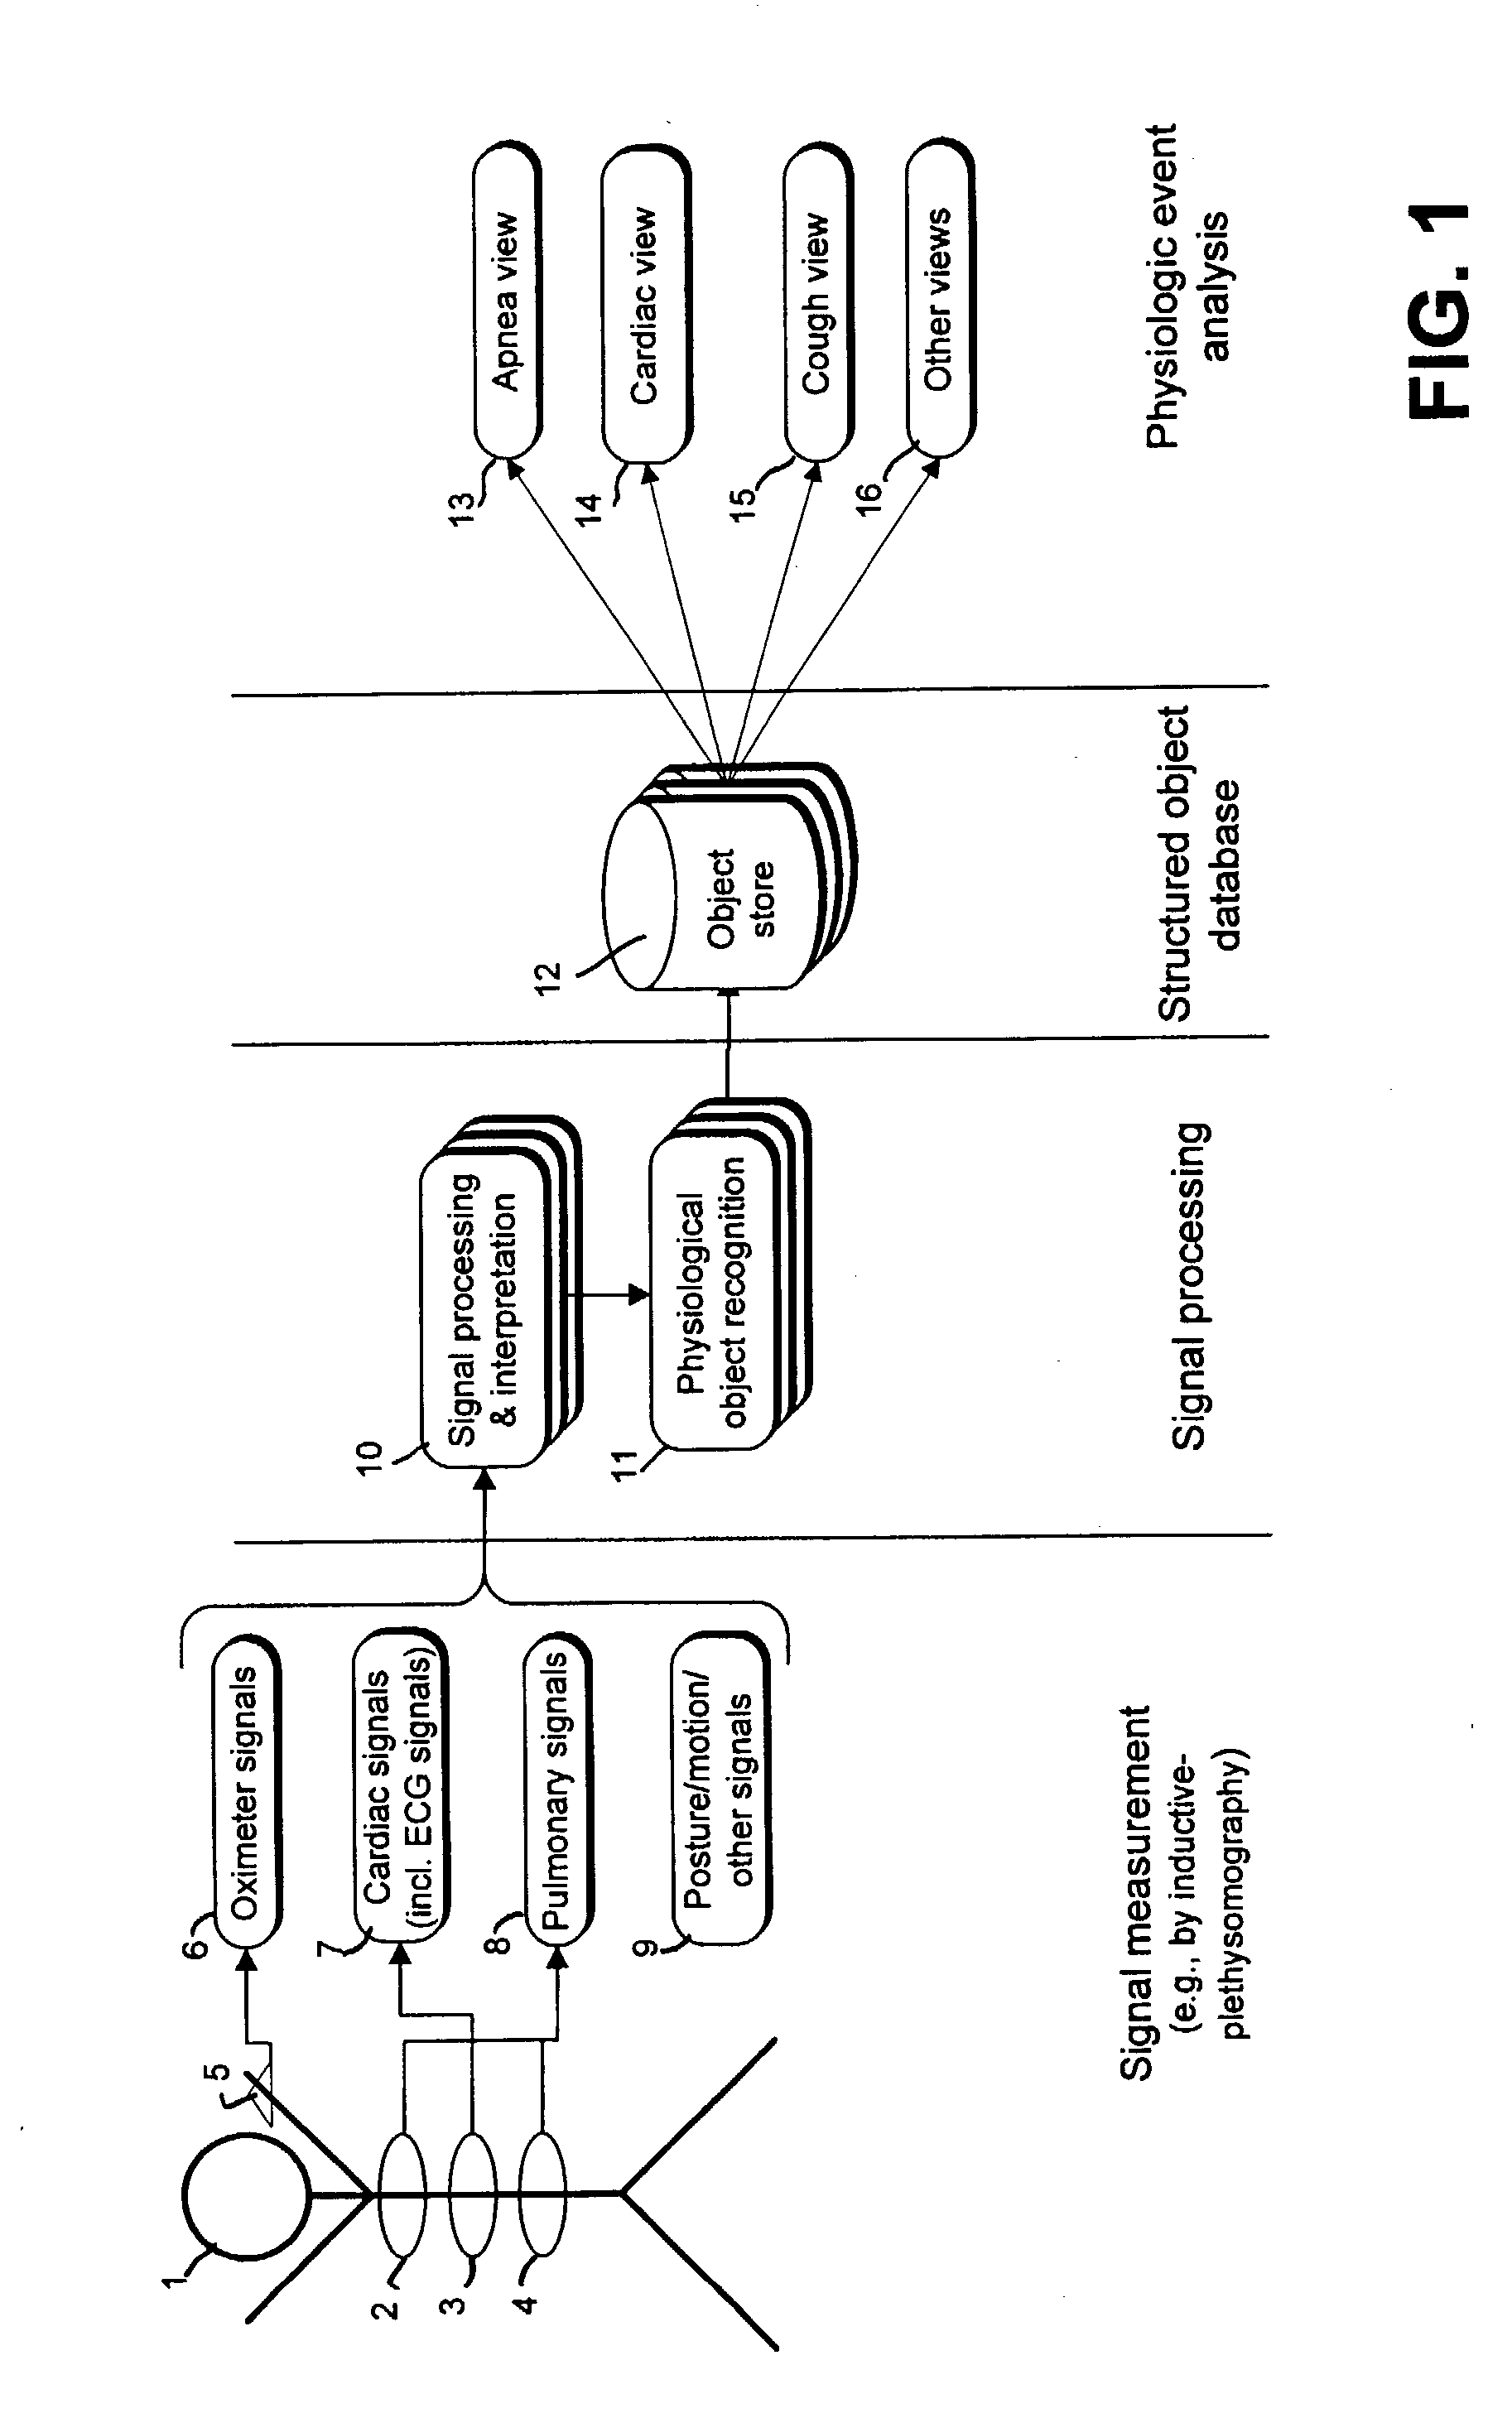 Methods and systems for analysis of physiological signals